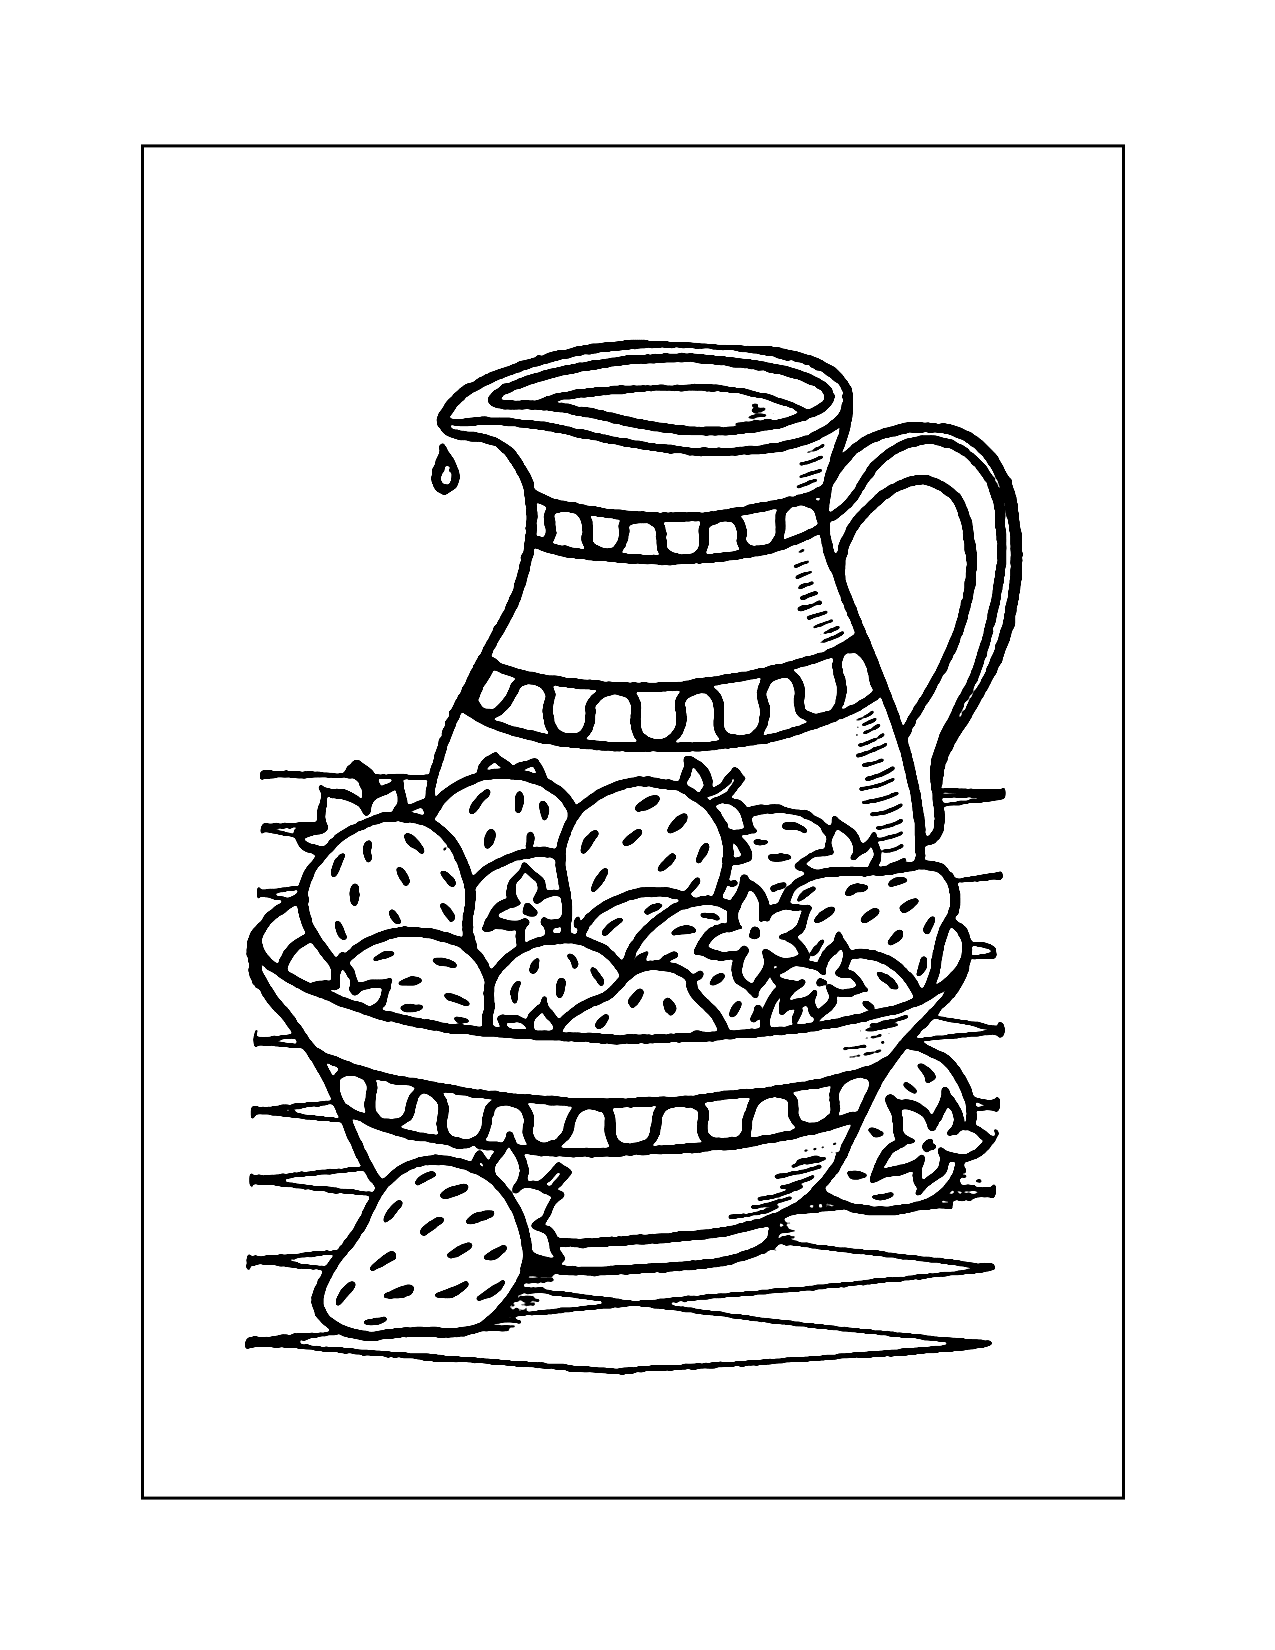 Summer Treats Coloring Page